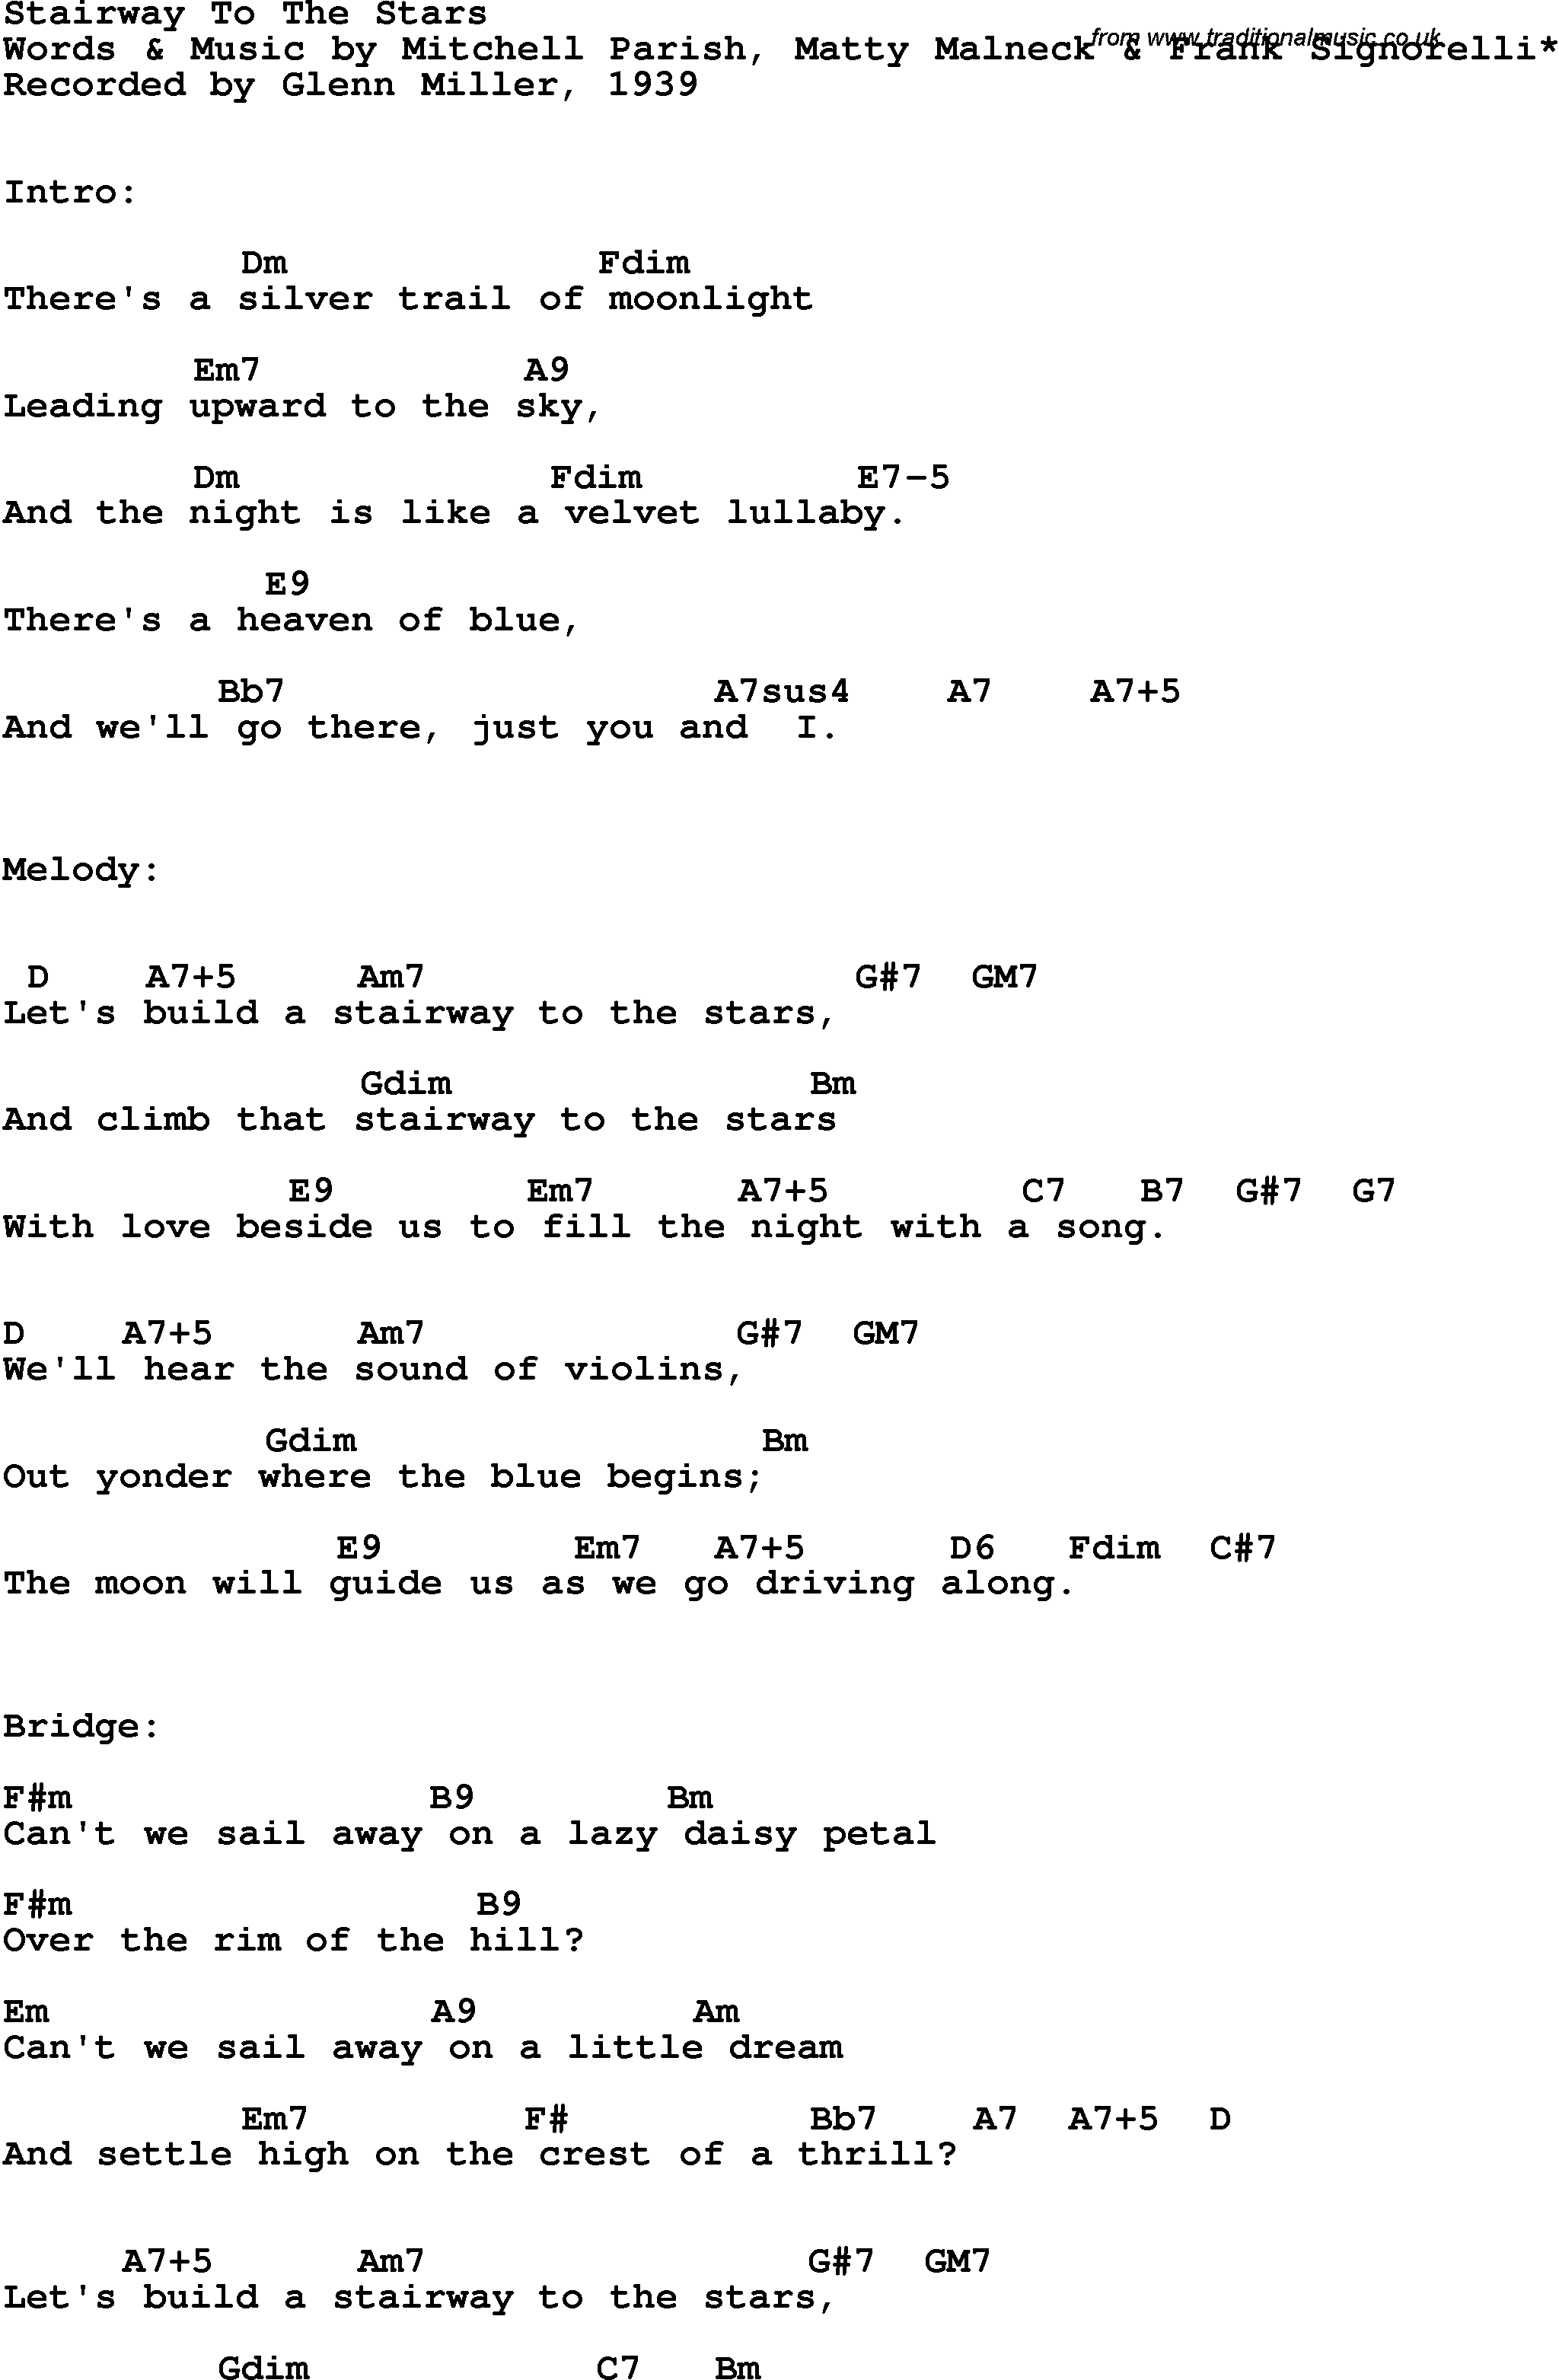 Song Lyrics with guitar chords for Stairway To The Stars - Glenn Miller, 1939